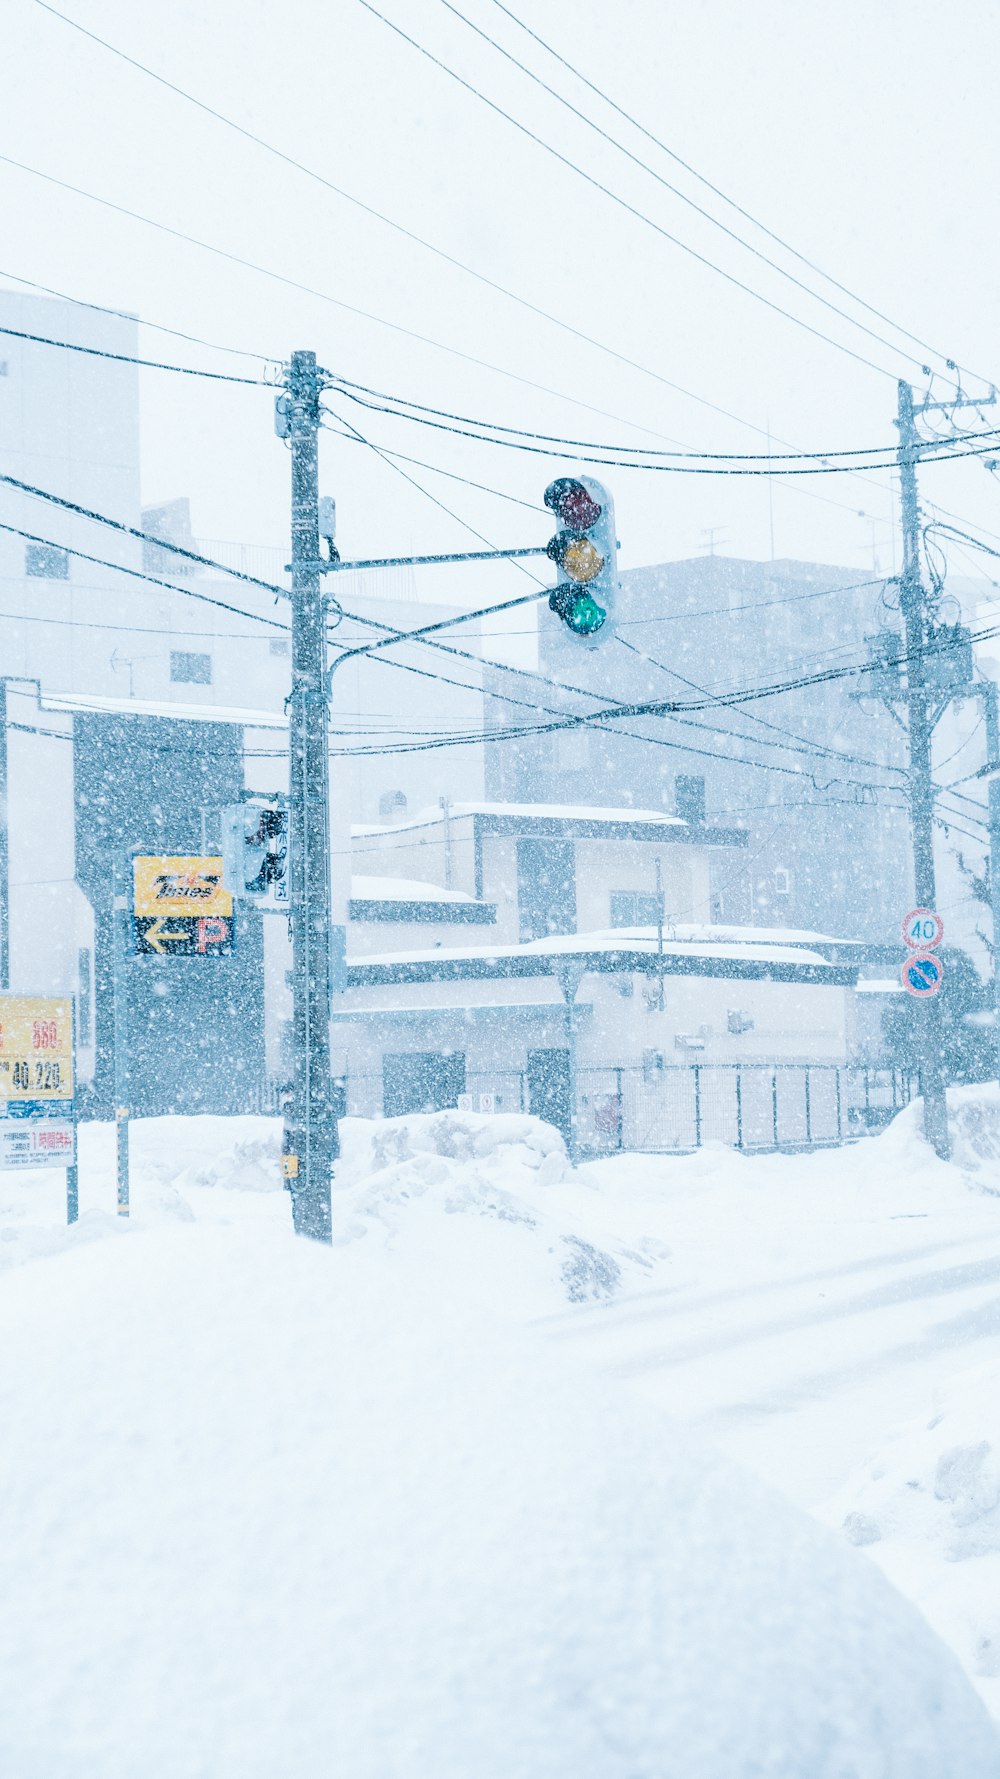 a traffic light in the middle of a snowy street